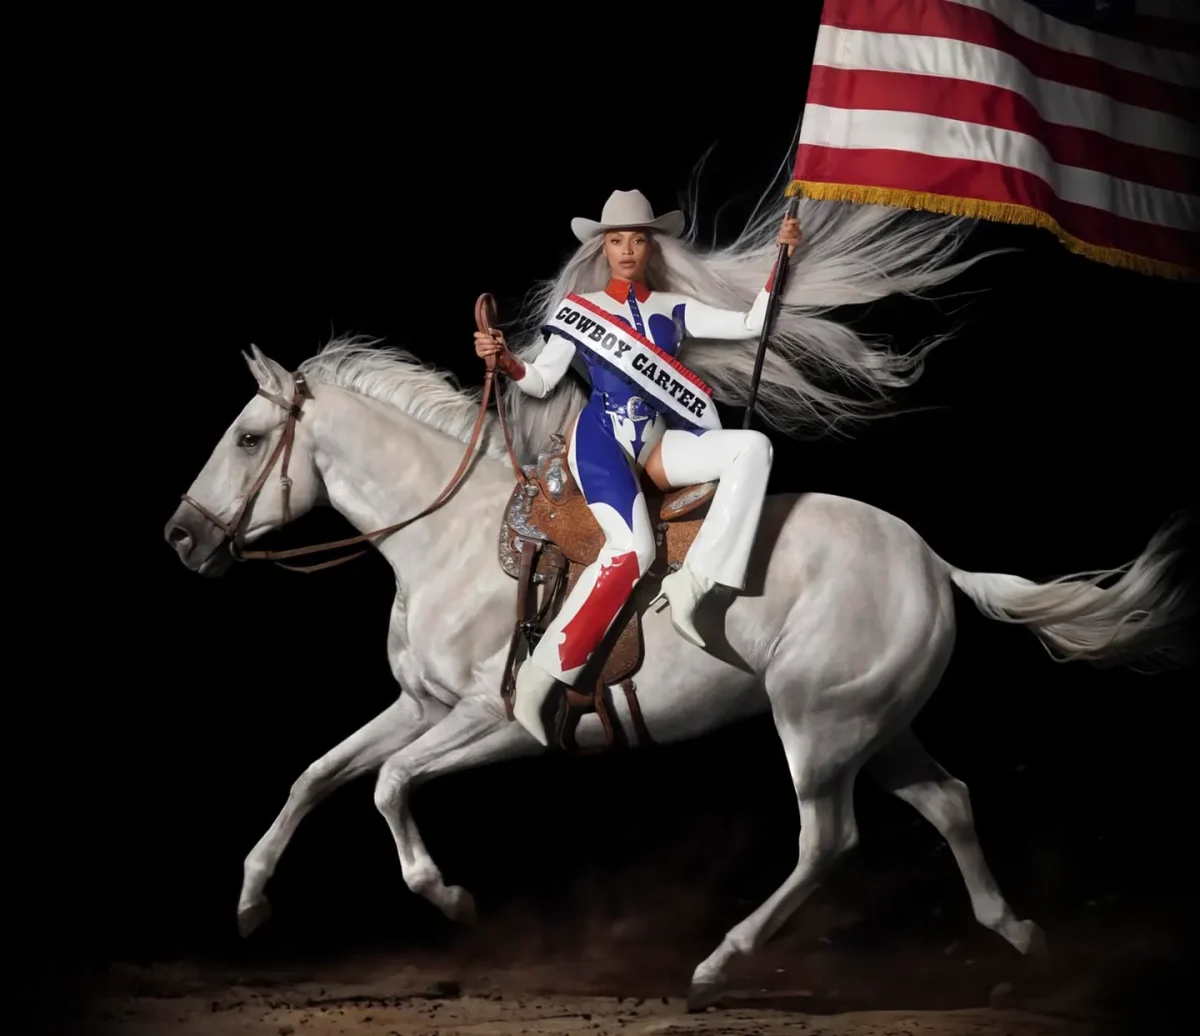 The+album+cover+for+Cowboy+Carter+features+Beyonce+on+a+white+horse+in+full+patriotic+display.+%28Courtesy+of+Columbia+Records%29